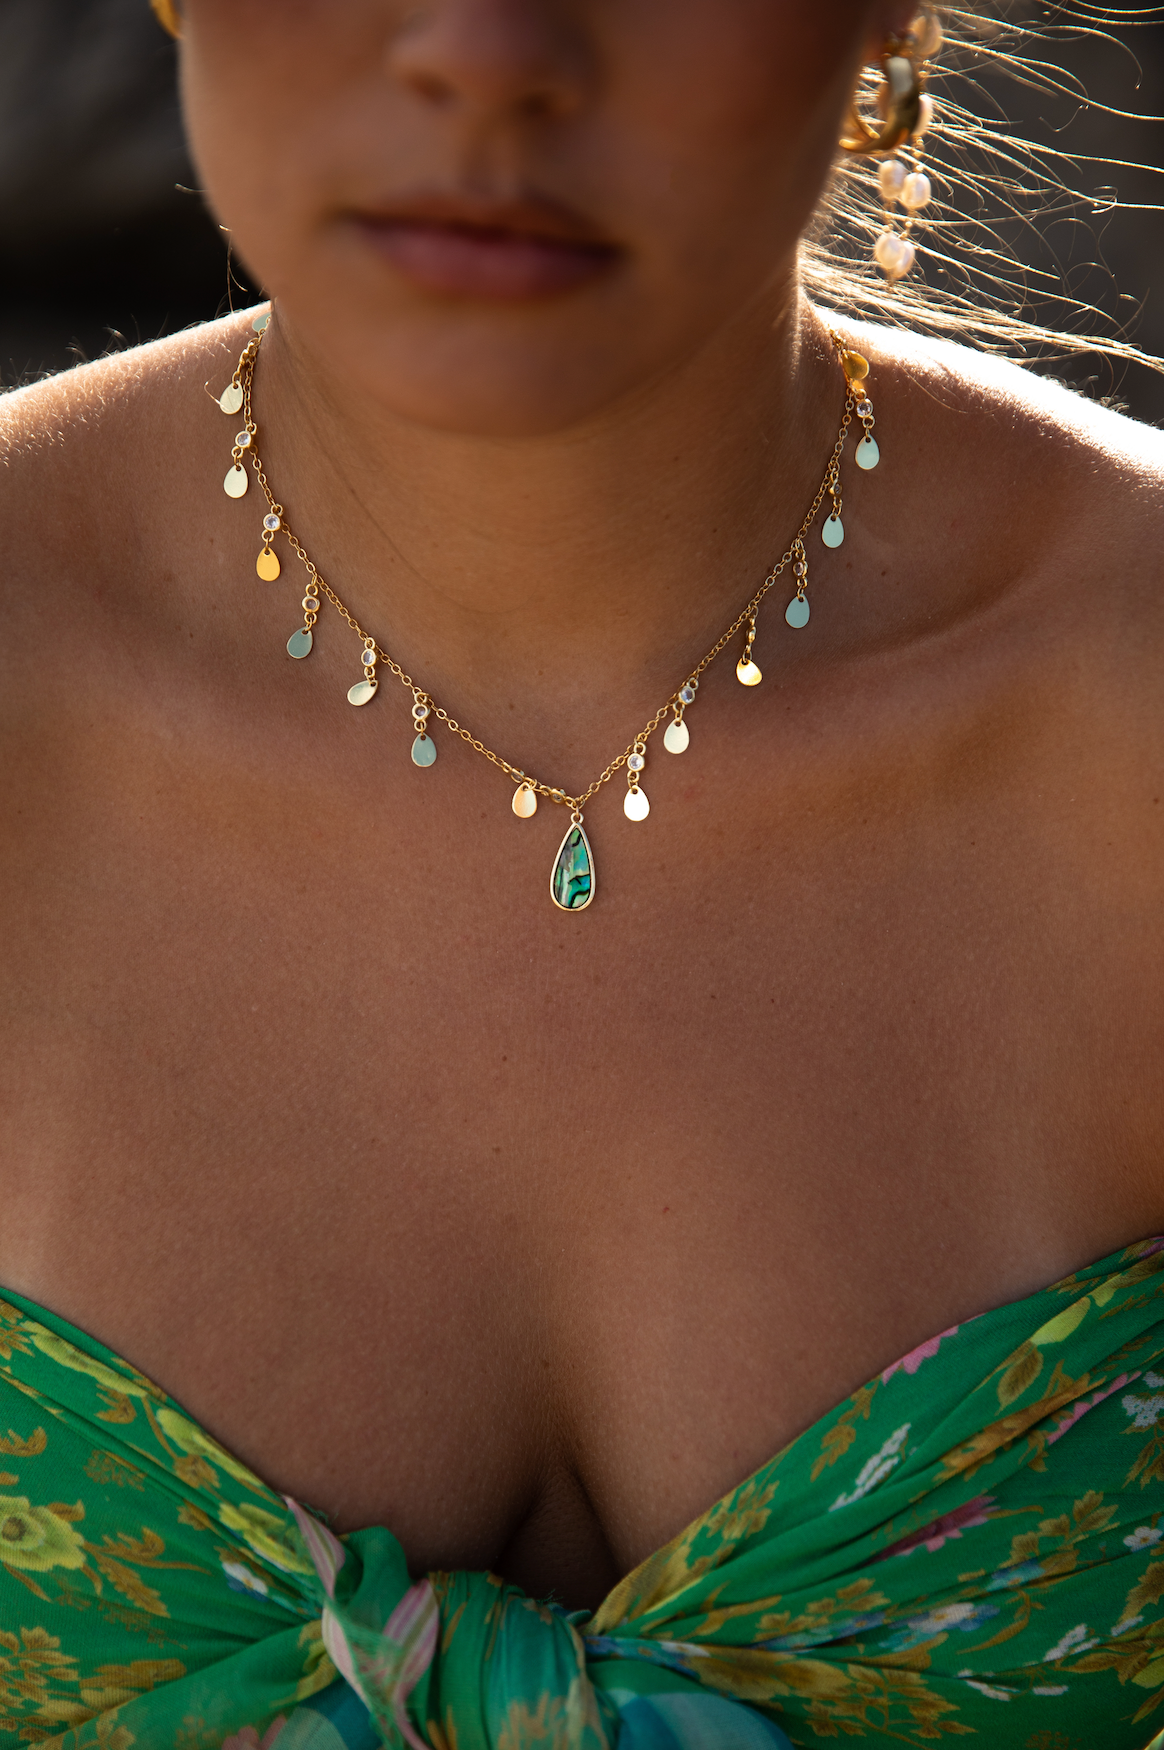 The Rain Drop Abalone Necklace